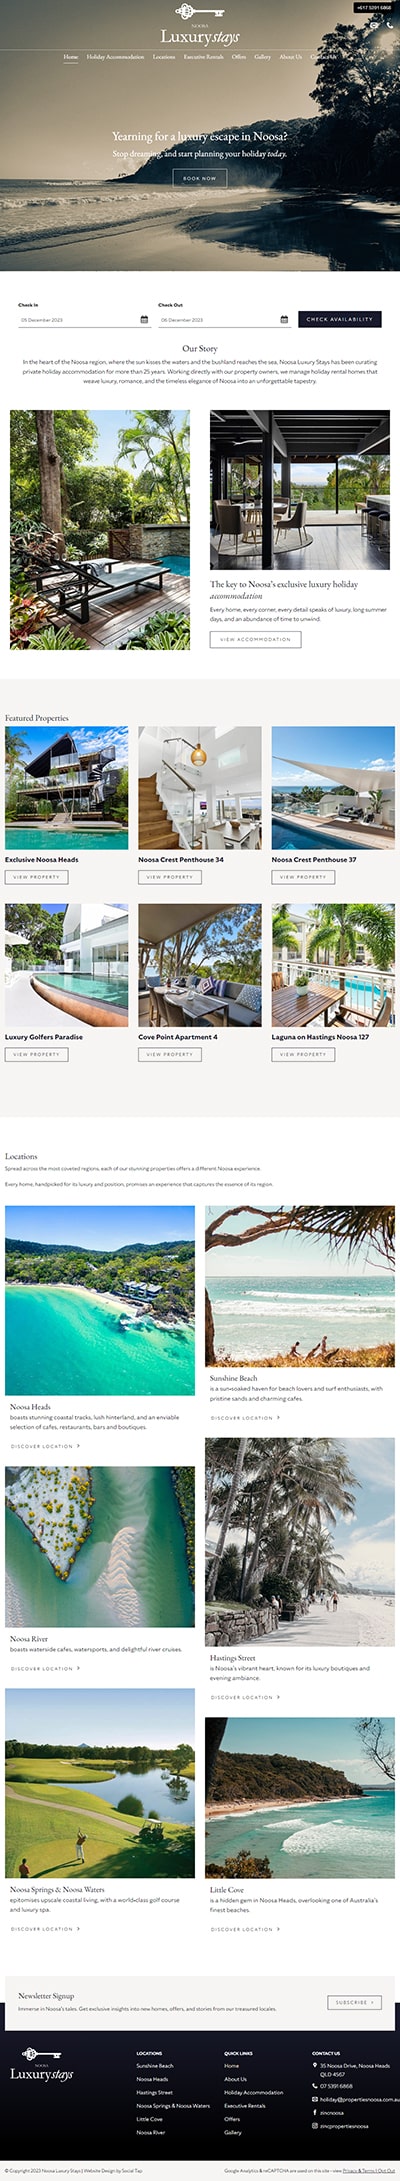 Our Work Hospitality Tourism Website Design Noosa Luxury Stays